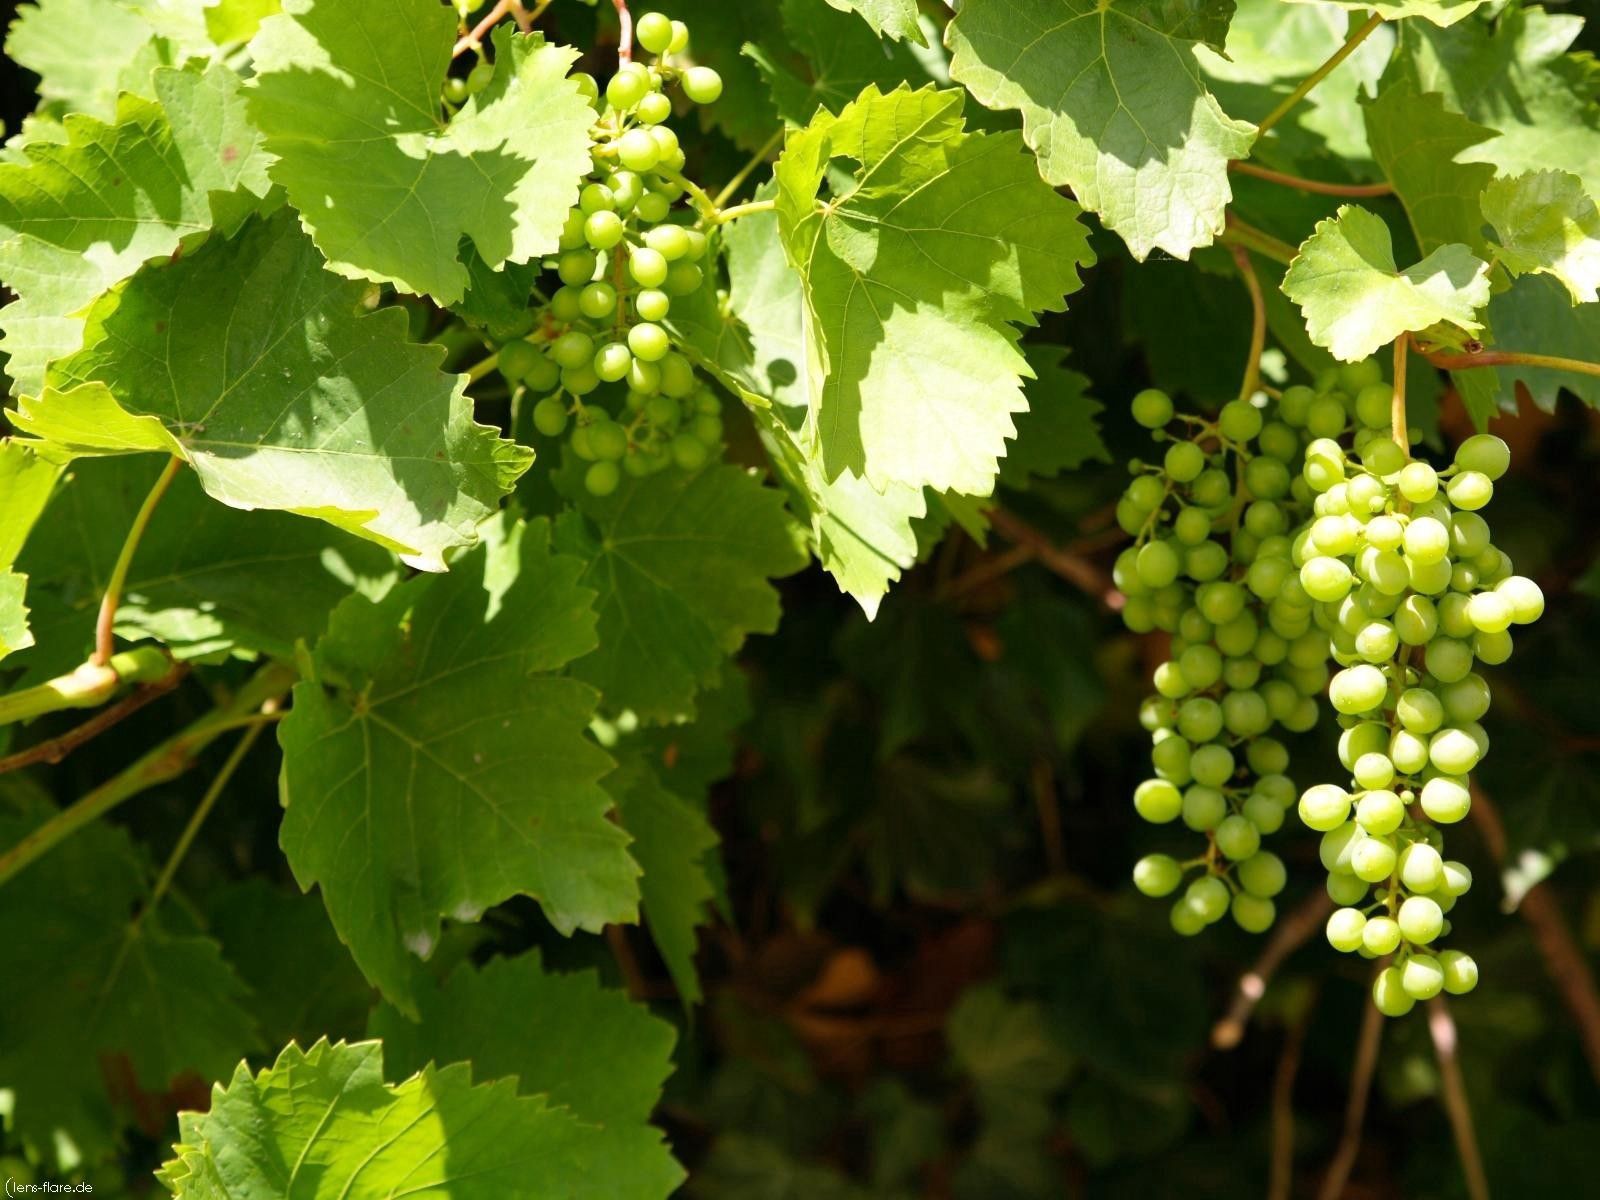 green, nature, leaves, summer, grapes, bunches, clusters